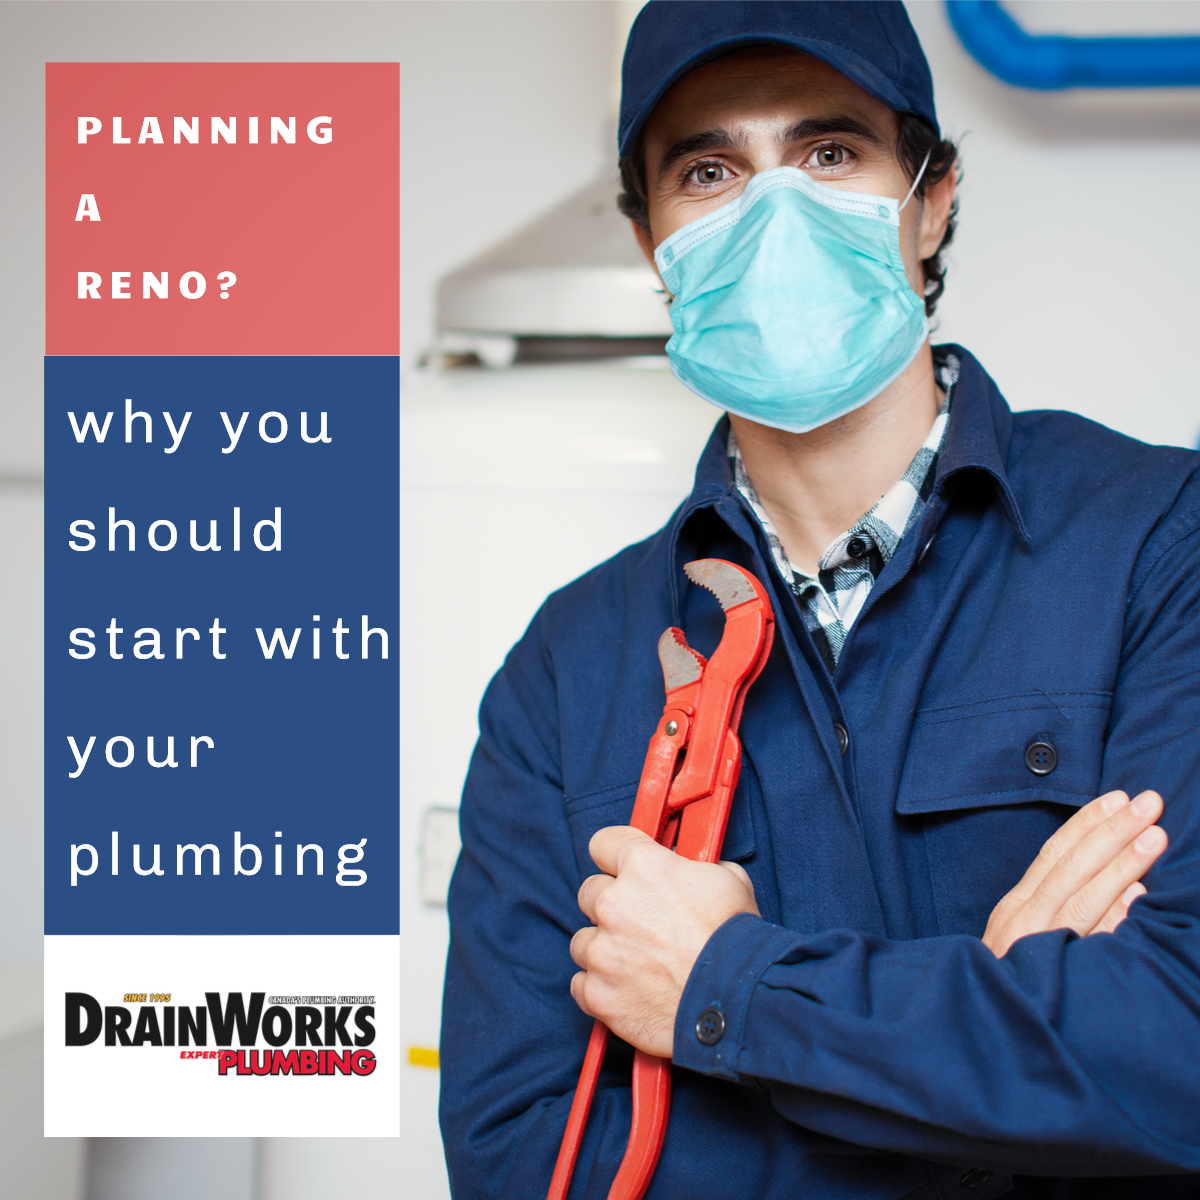 Planning a Reno? Plumber equipped to start with your Plumbing.